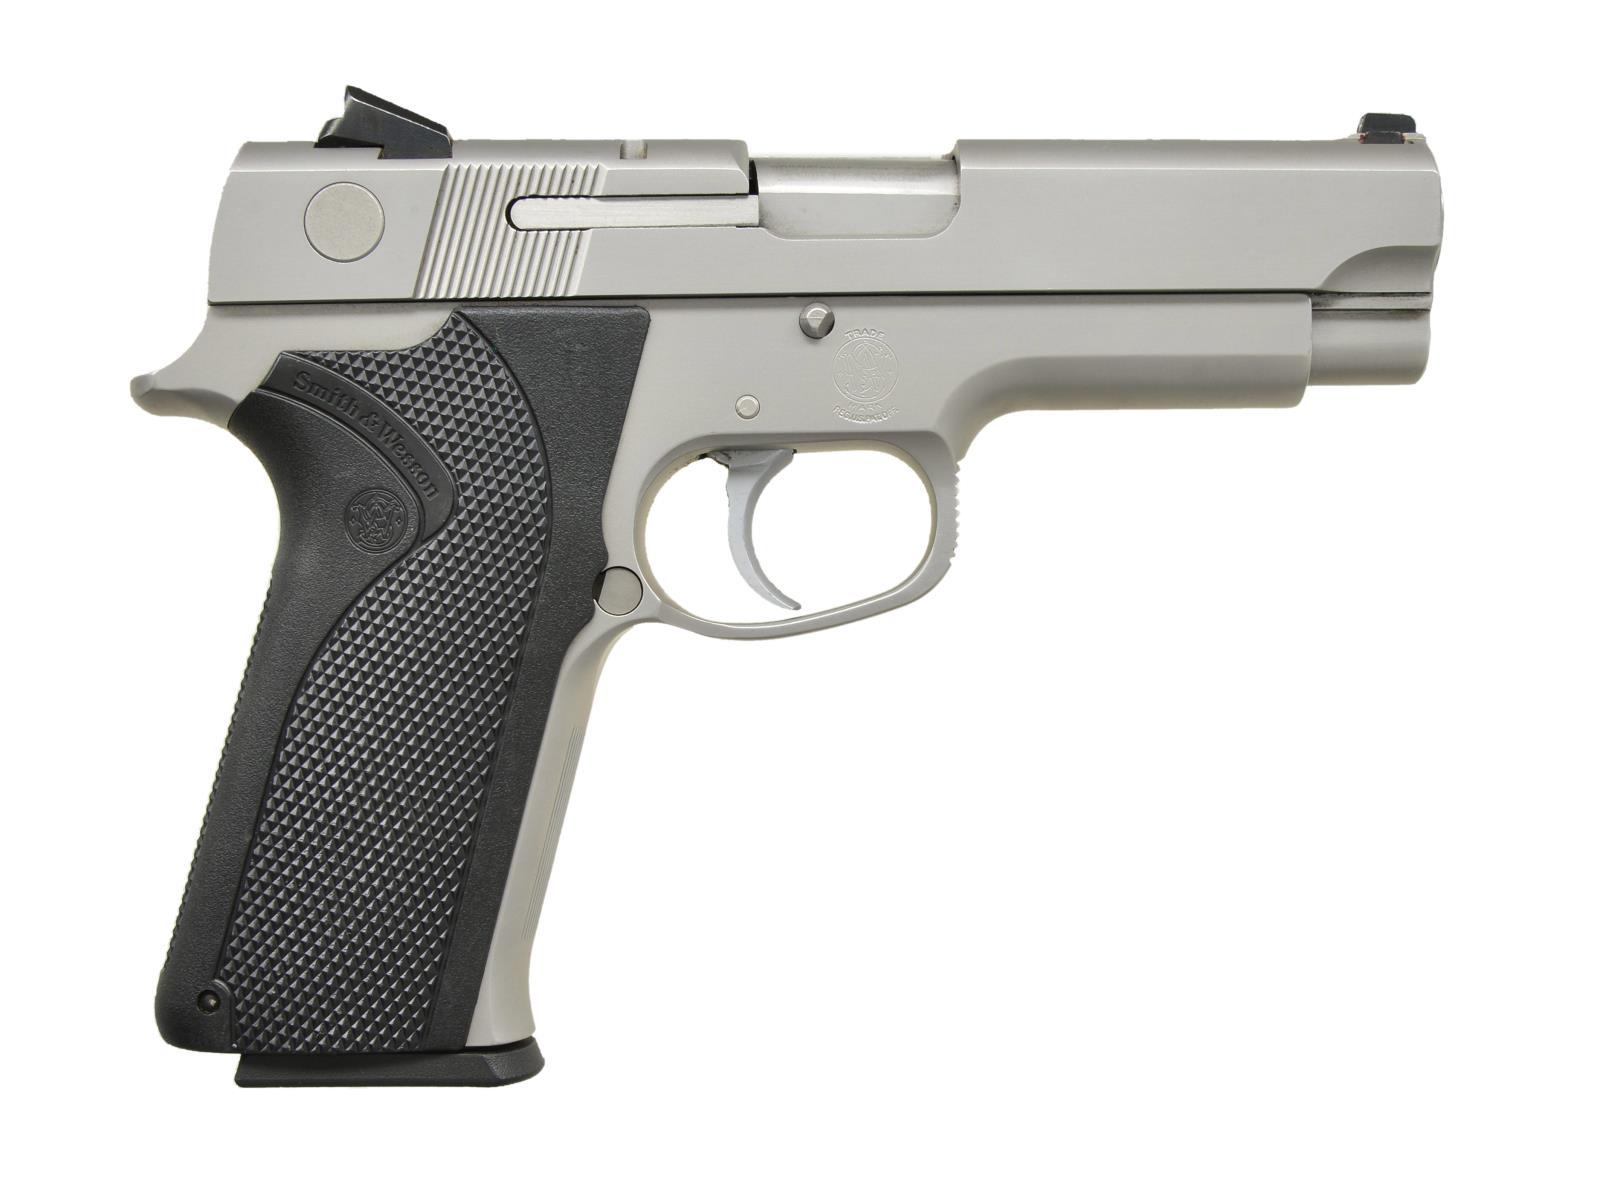 SMITH & WESSON MODEL 4586 STAINLESS STEEL PISTOL.